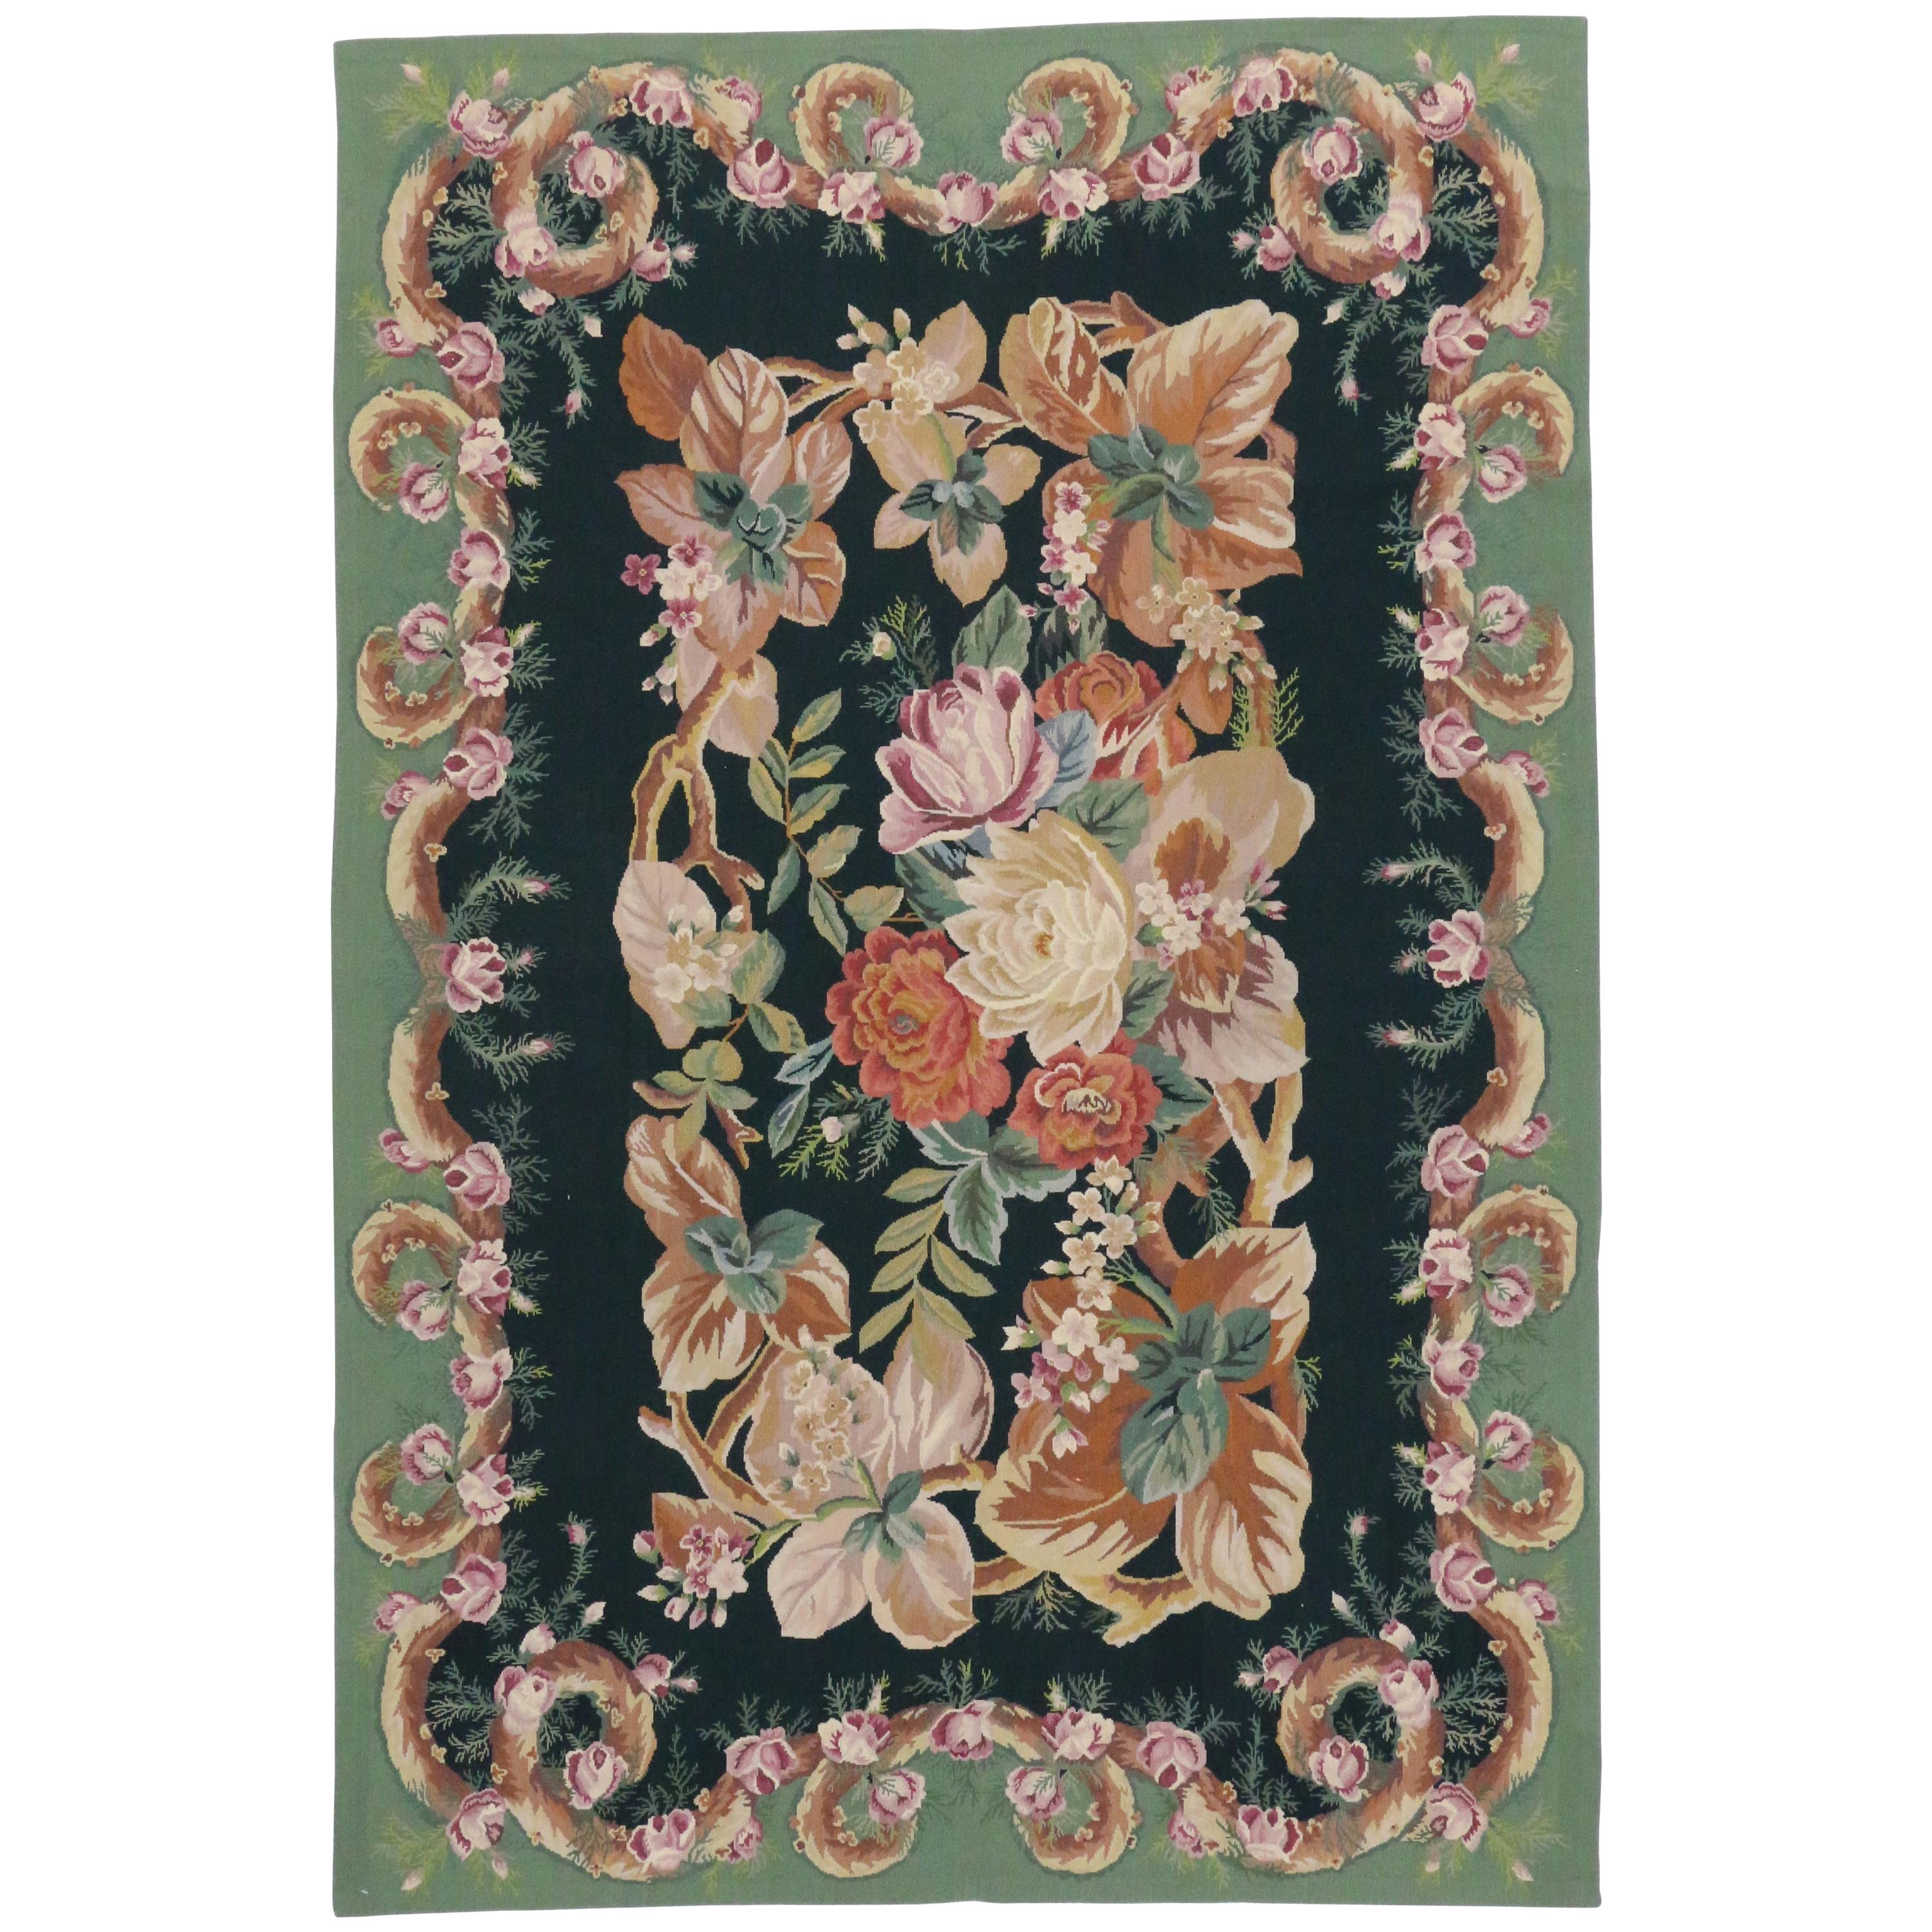 Vintage Chinese Aubusson Style Needlepoint Rug with French Provincial Style